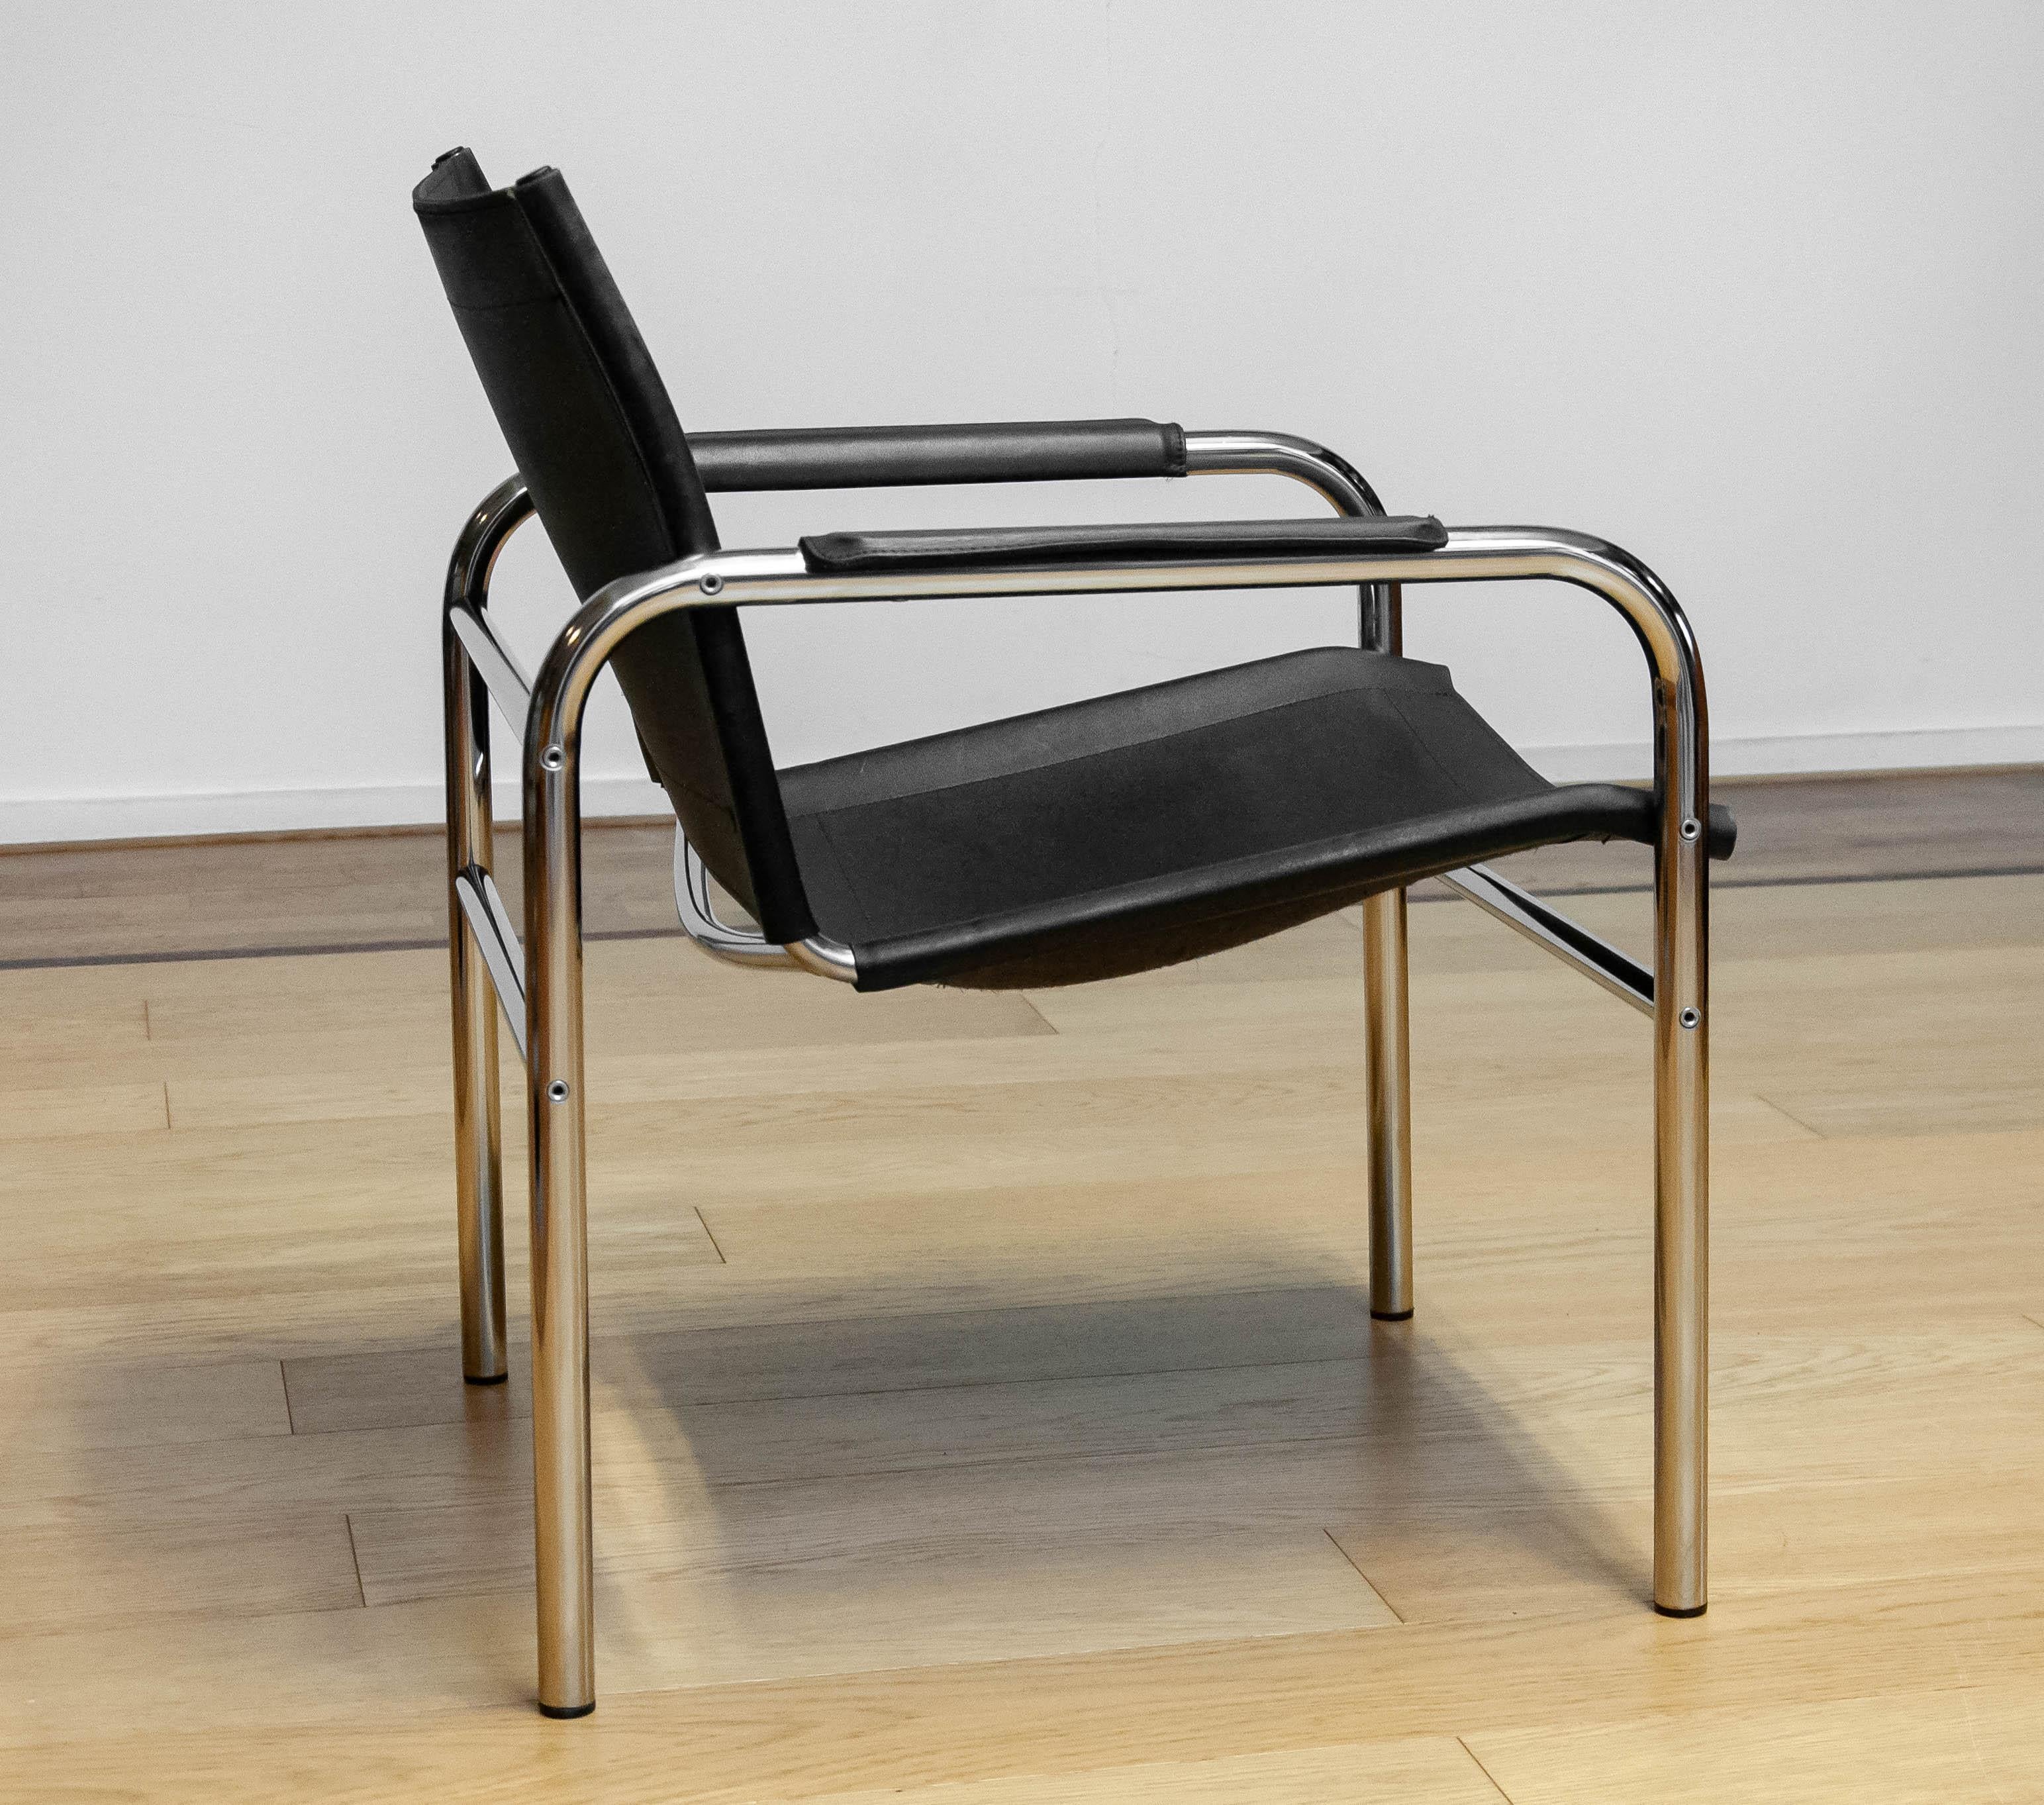 Metal 1970s Tubular Armchair Designed By Tord Bjorklund Upholstered With Black Leather For Sale